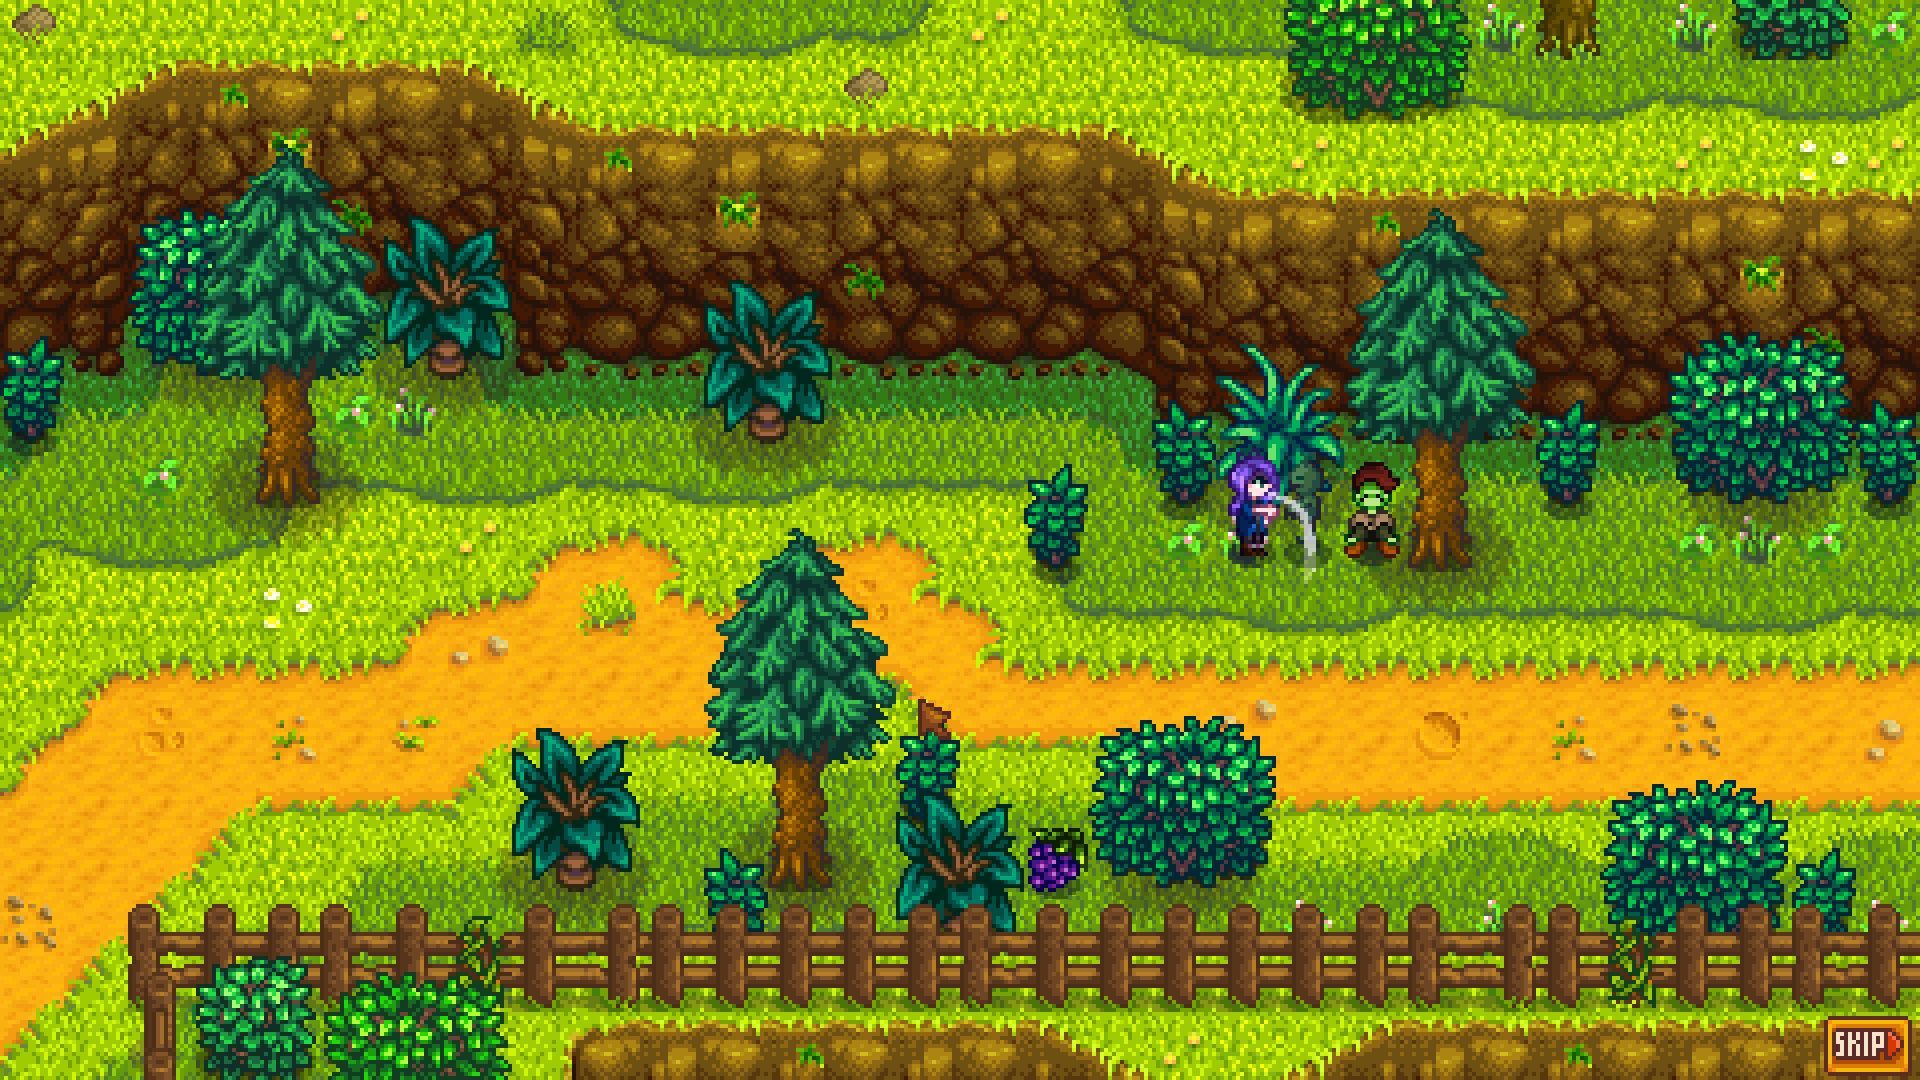 Stardew Valley: 10 Tips To Make A Highly Profitable Farm